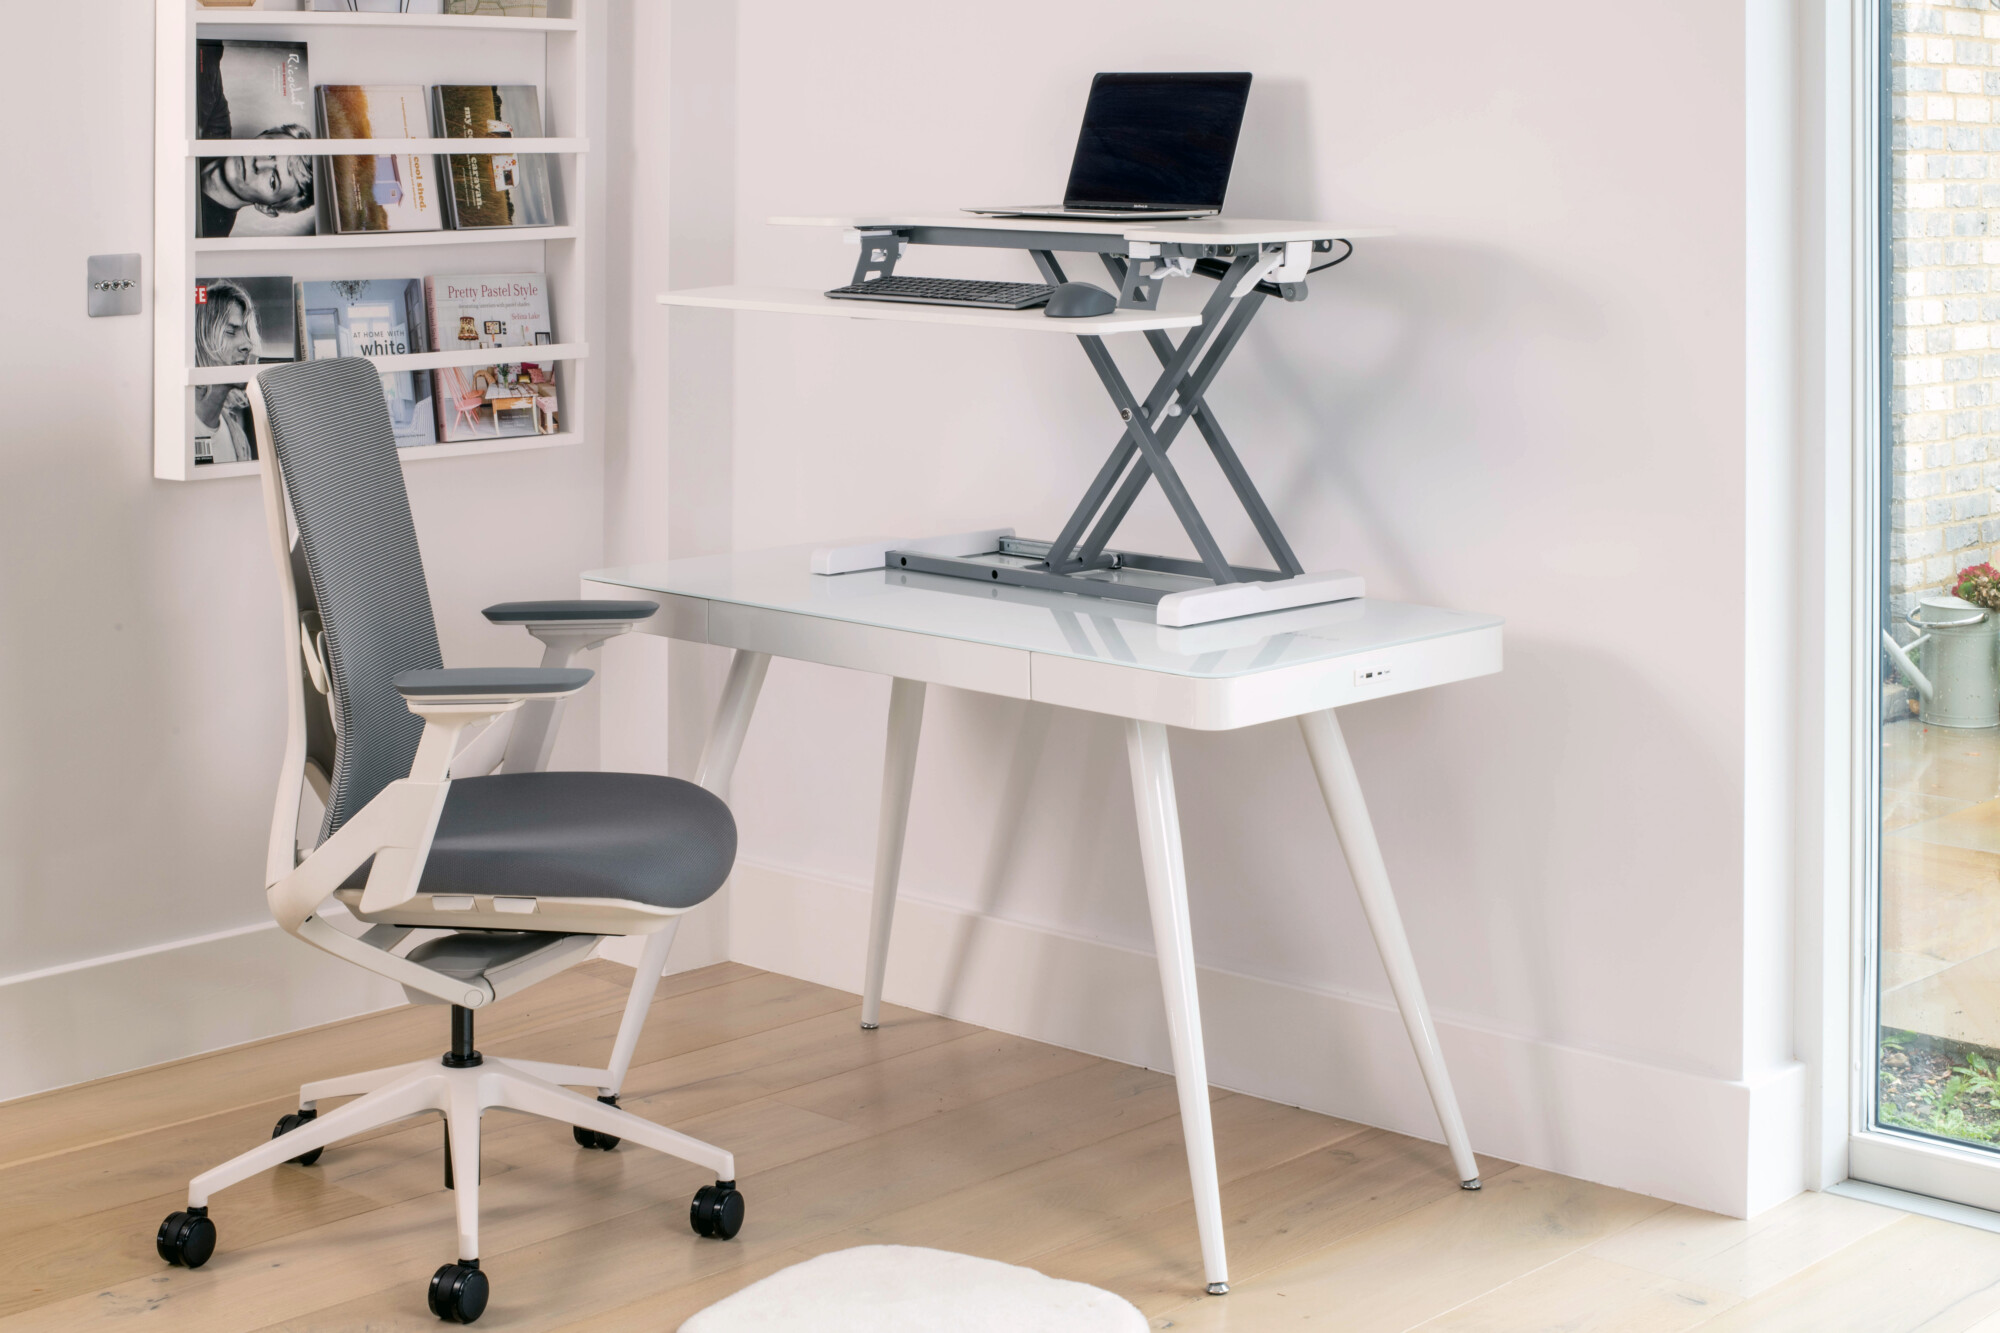 Improve your health at home both physically and mentally with a smart desk or standing desk converter,. Designed to provider many benefits both for your physical health and mental well-being. 